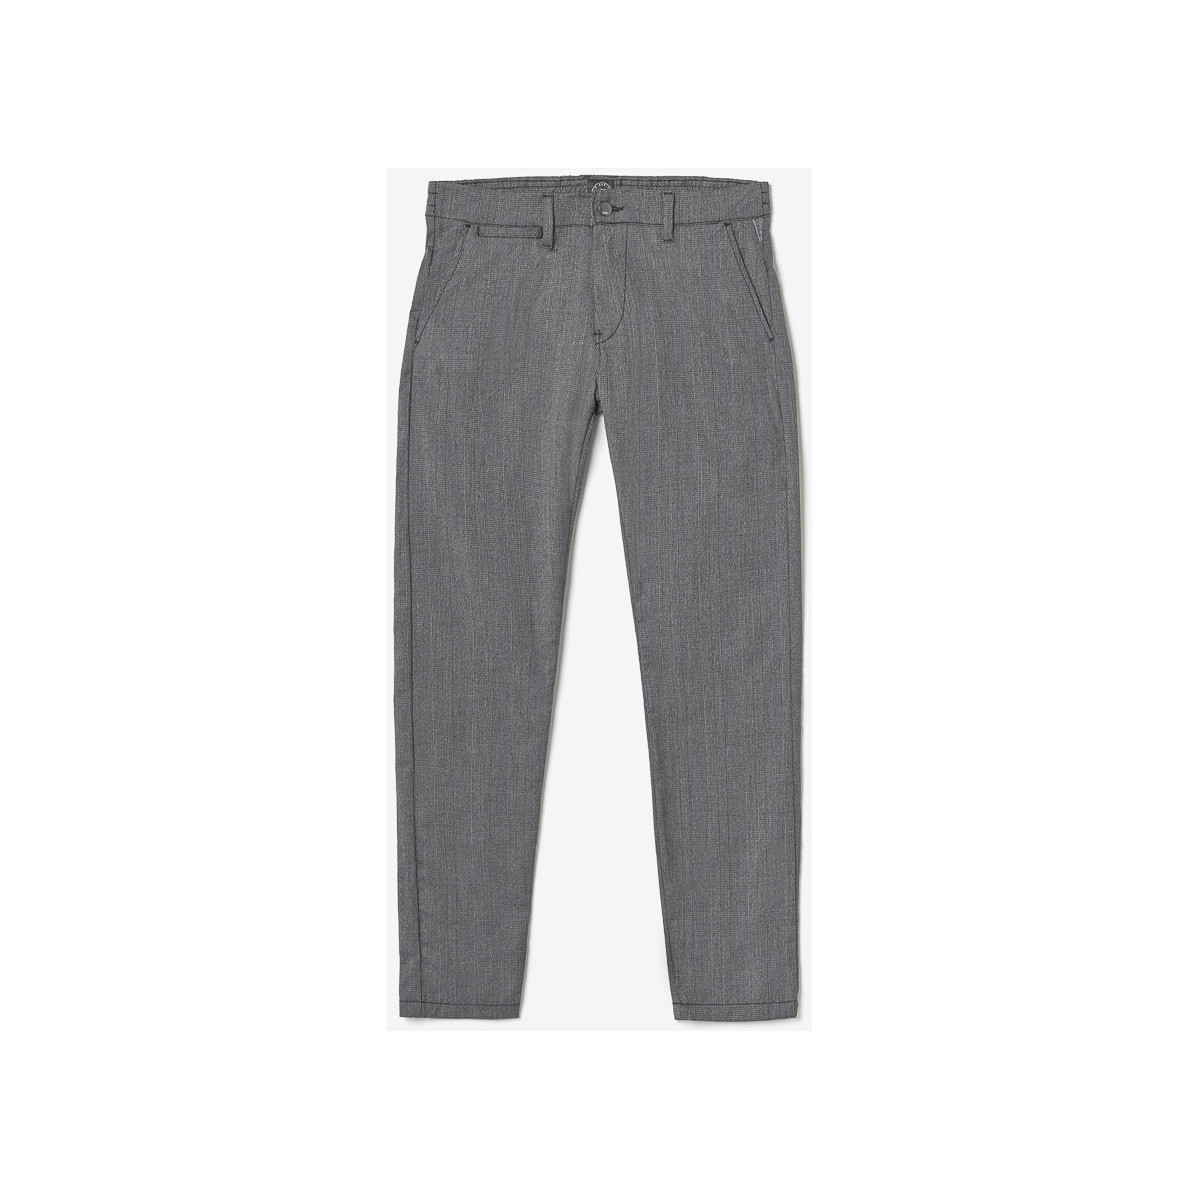 Grey Trousers for Men from Spartoo GOOFASH